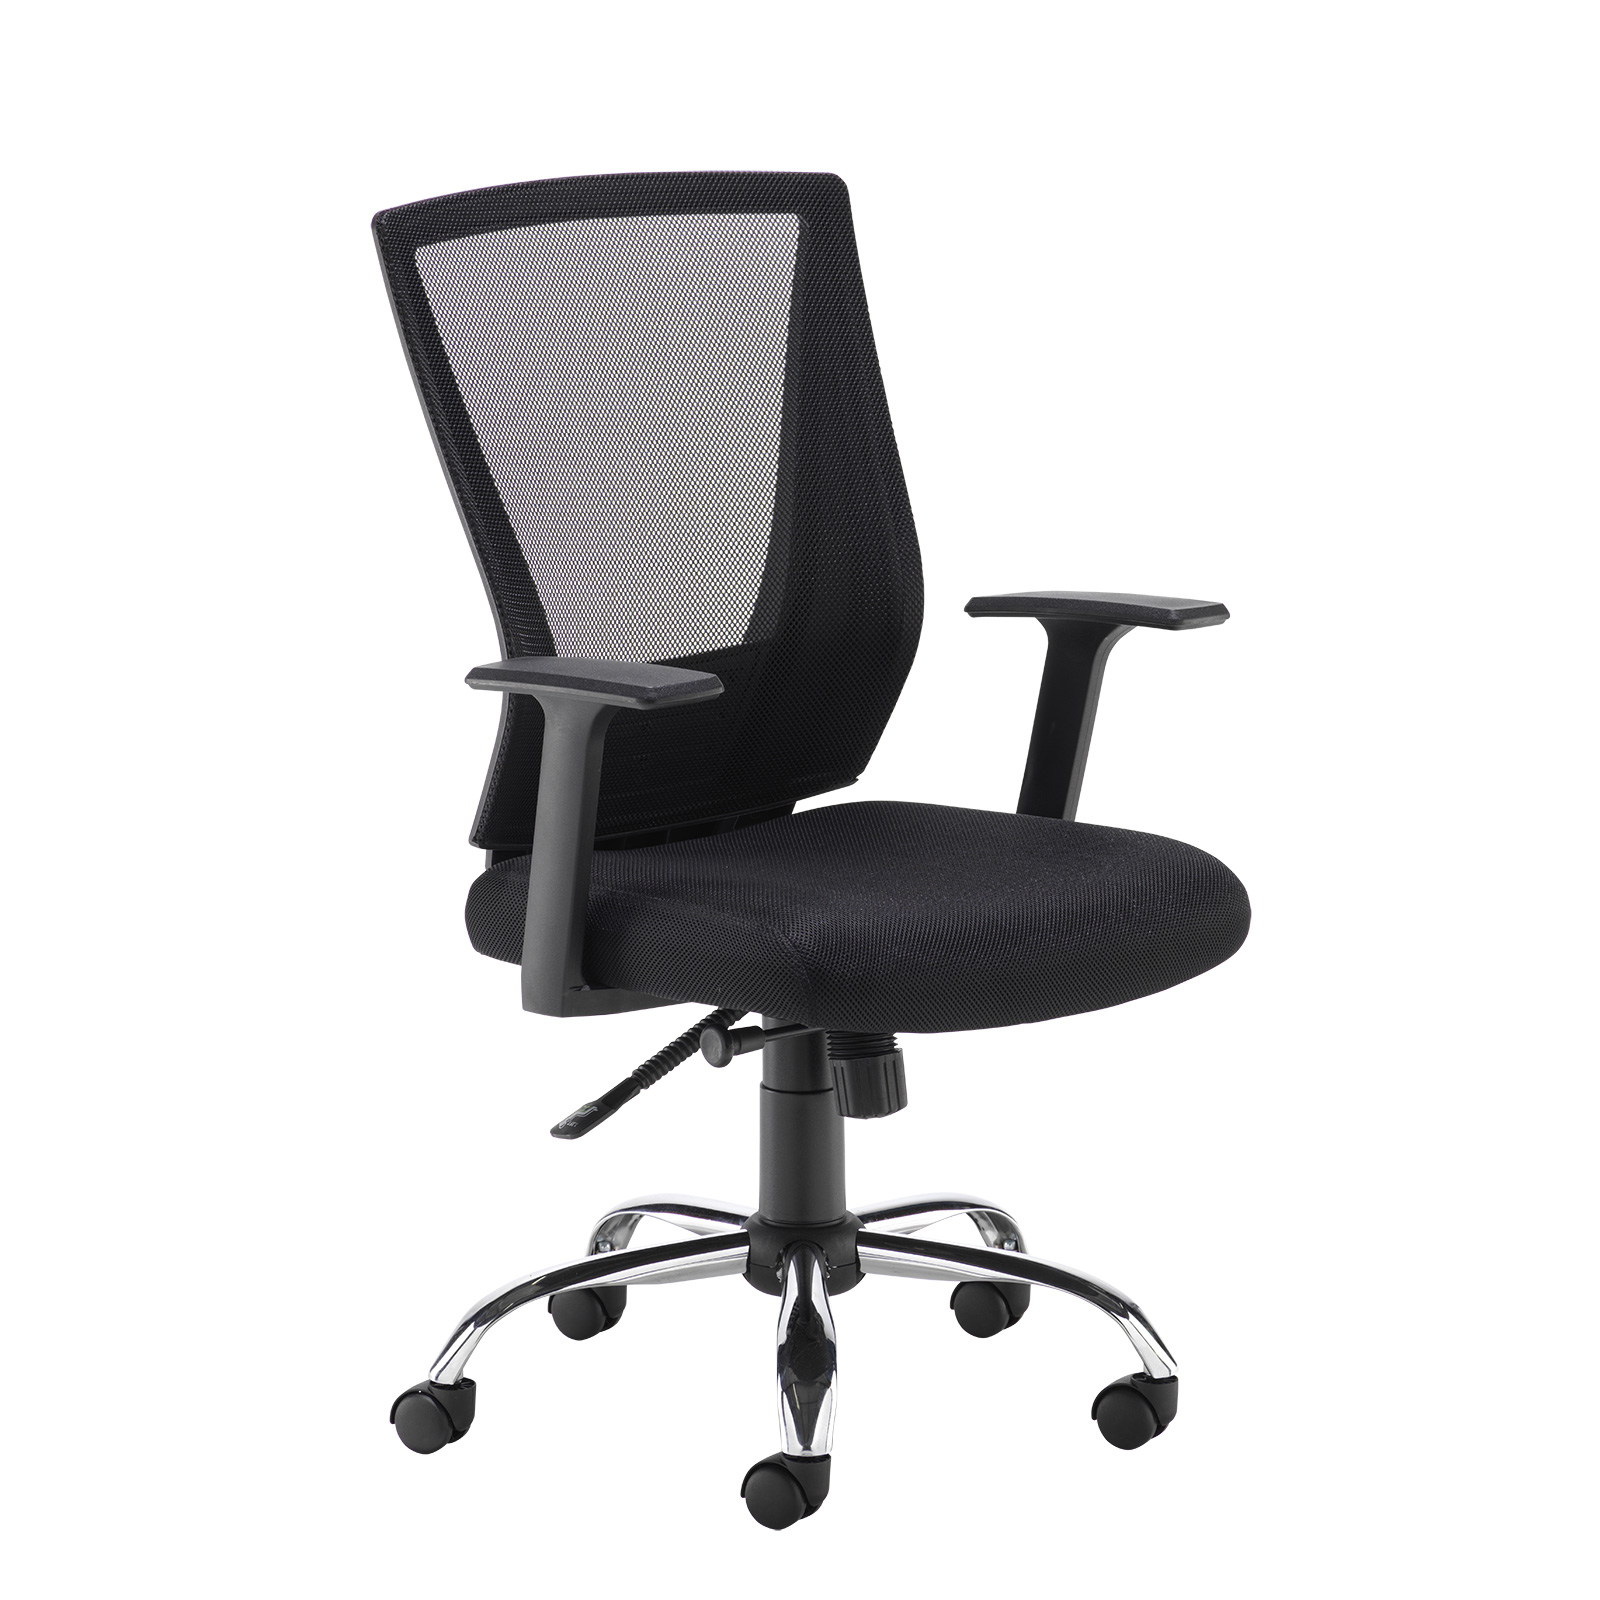 Miller black mesh back operator chair with black fabric seat and chrome base